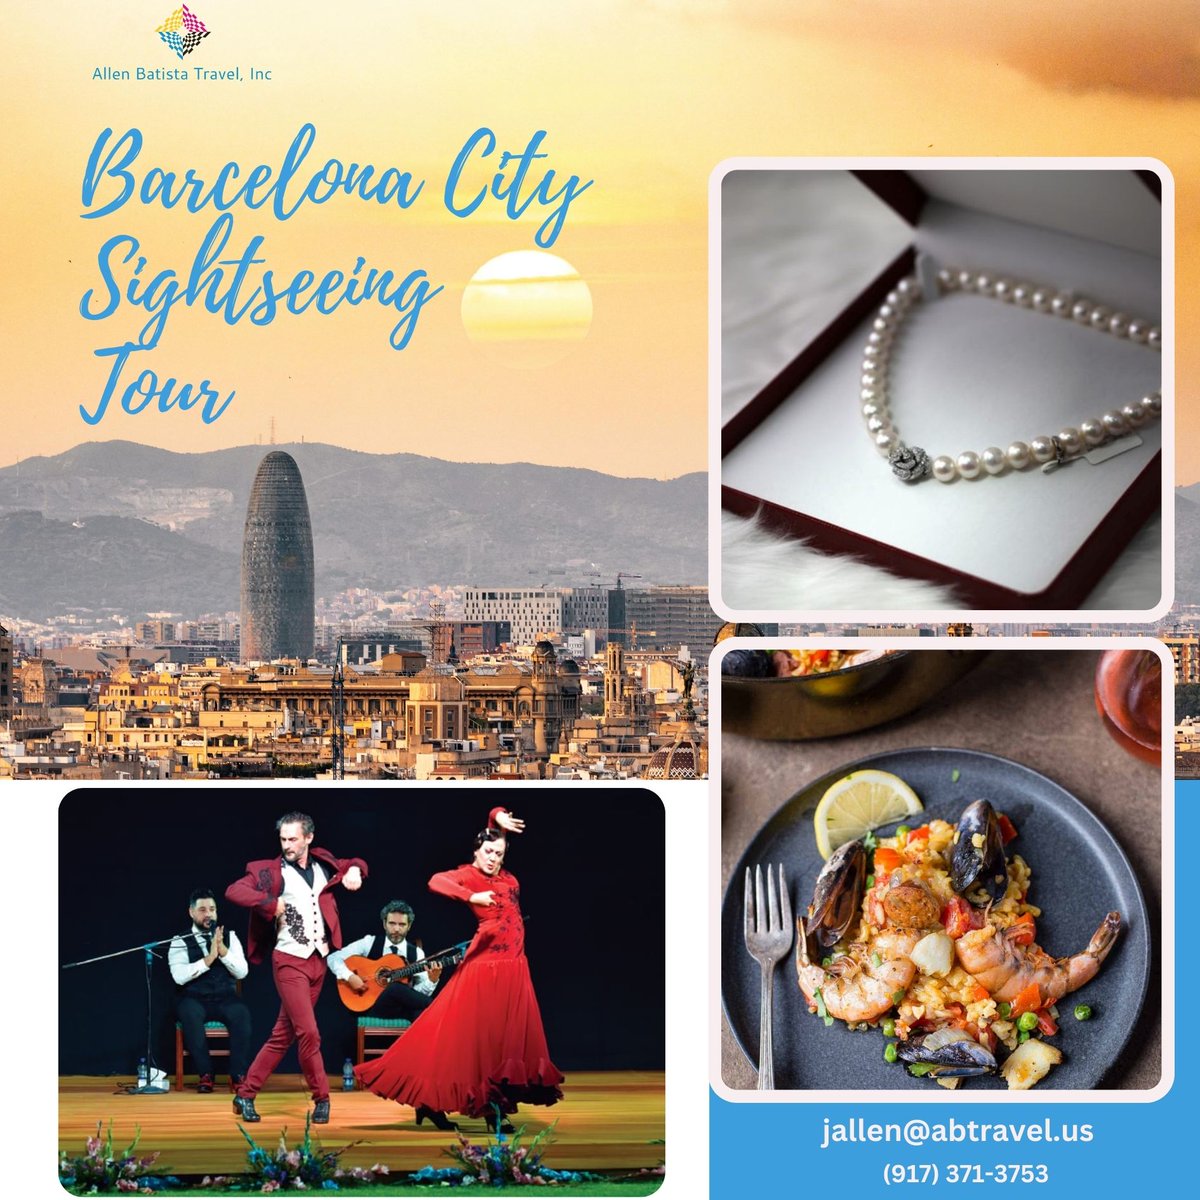 Discover the magic of Barcelona with our City Sightseeing Tour. Explore iconic landmarks, savor delicious food, visit tapas bars and experience the nightlight. Book now!
abtravel.us/barcelona-spai…
#BarcelonaTour #BarcelonaCitySightseeing #TravelSpain